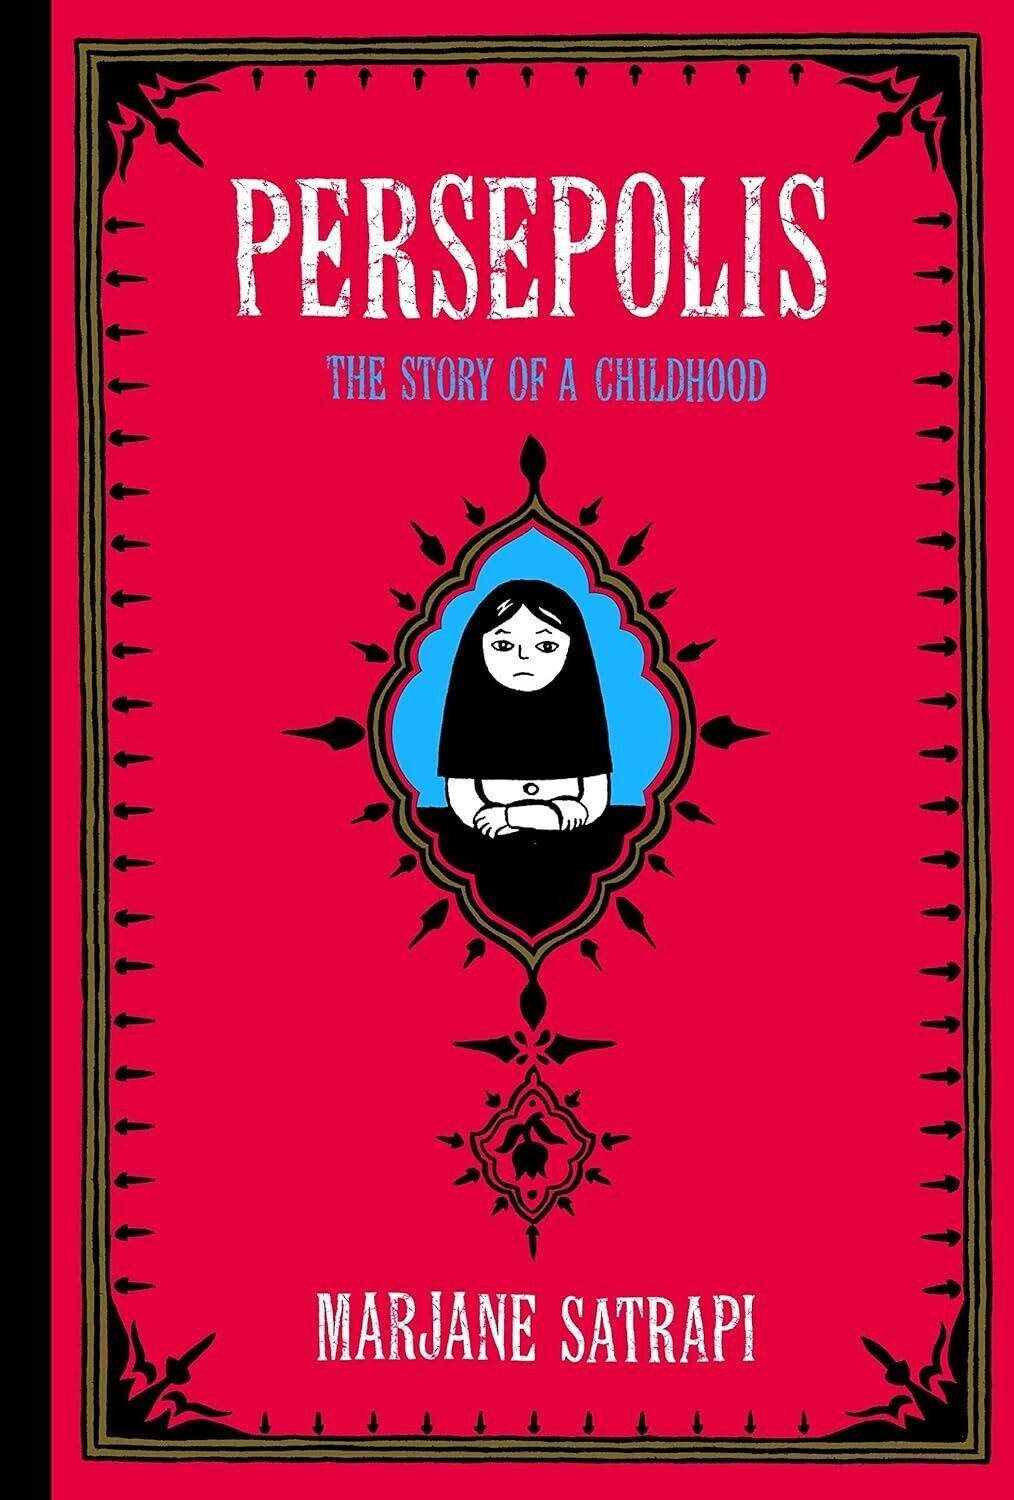 Persepolis: The Story of a Childhood Paperback – Illustrated, June 1, 2004